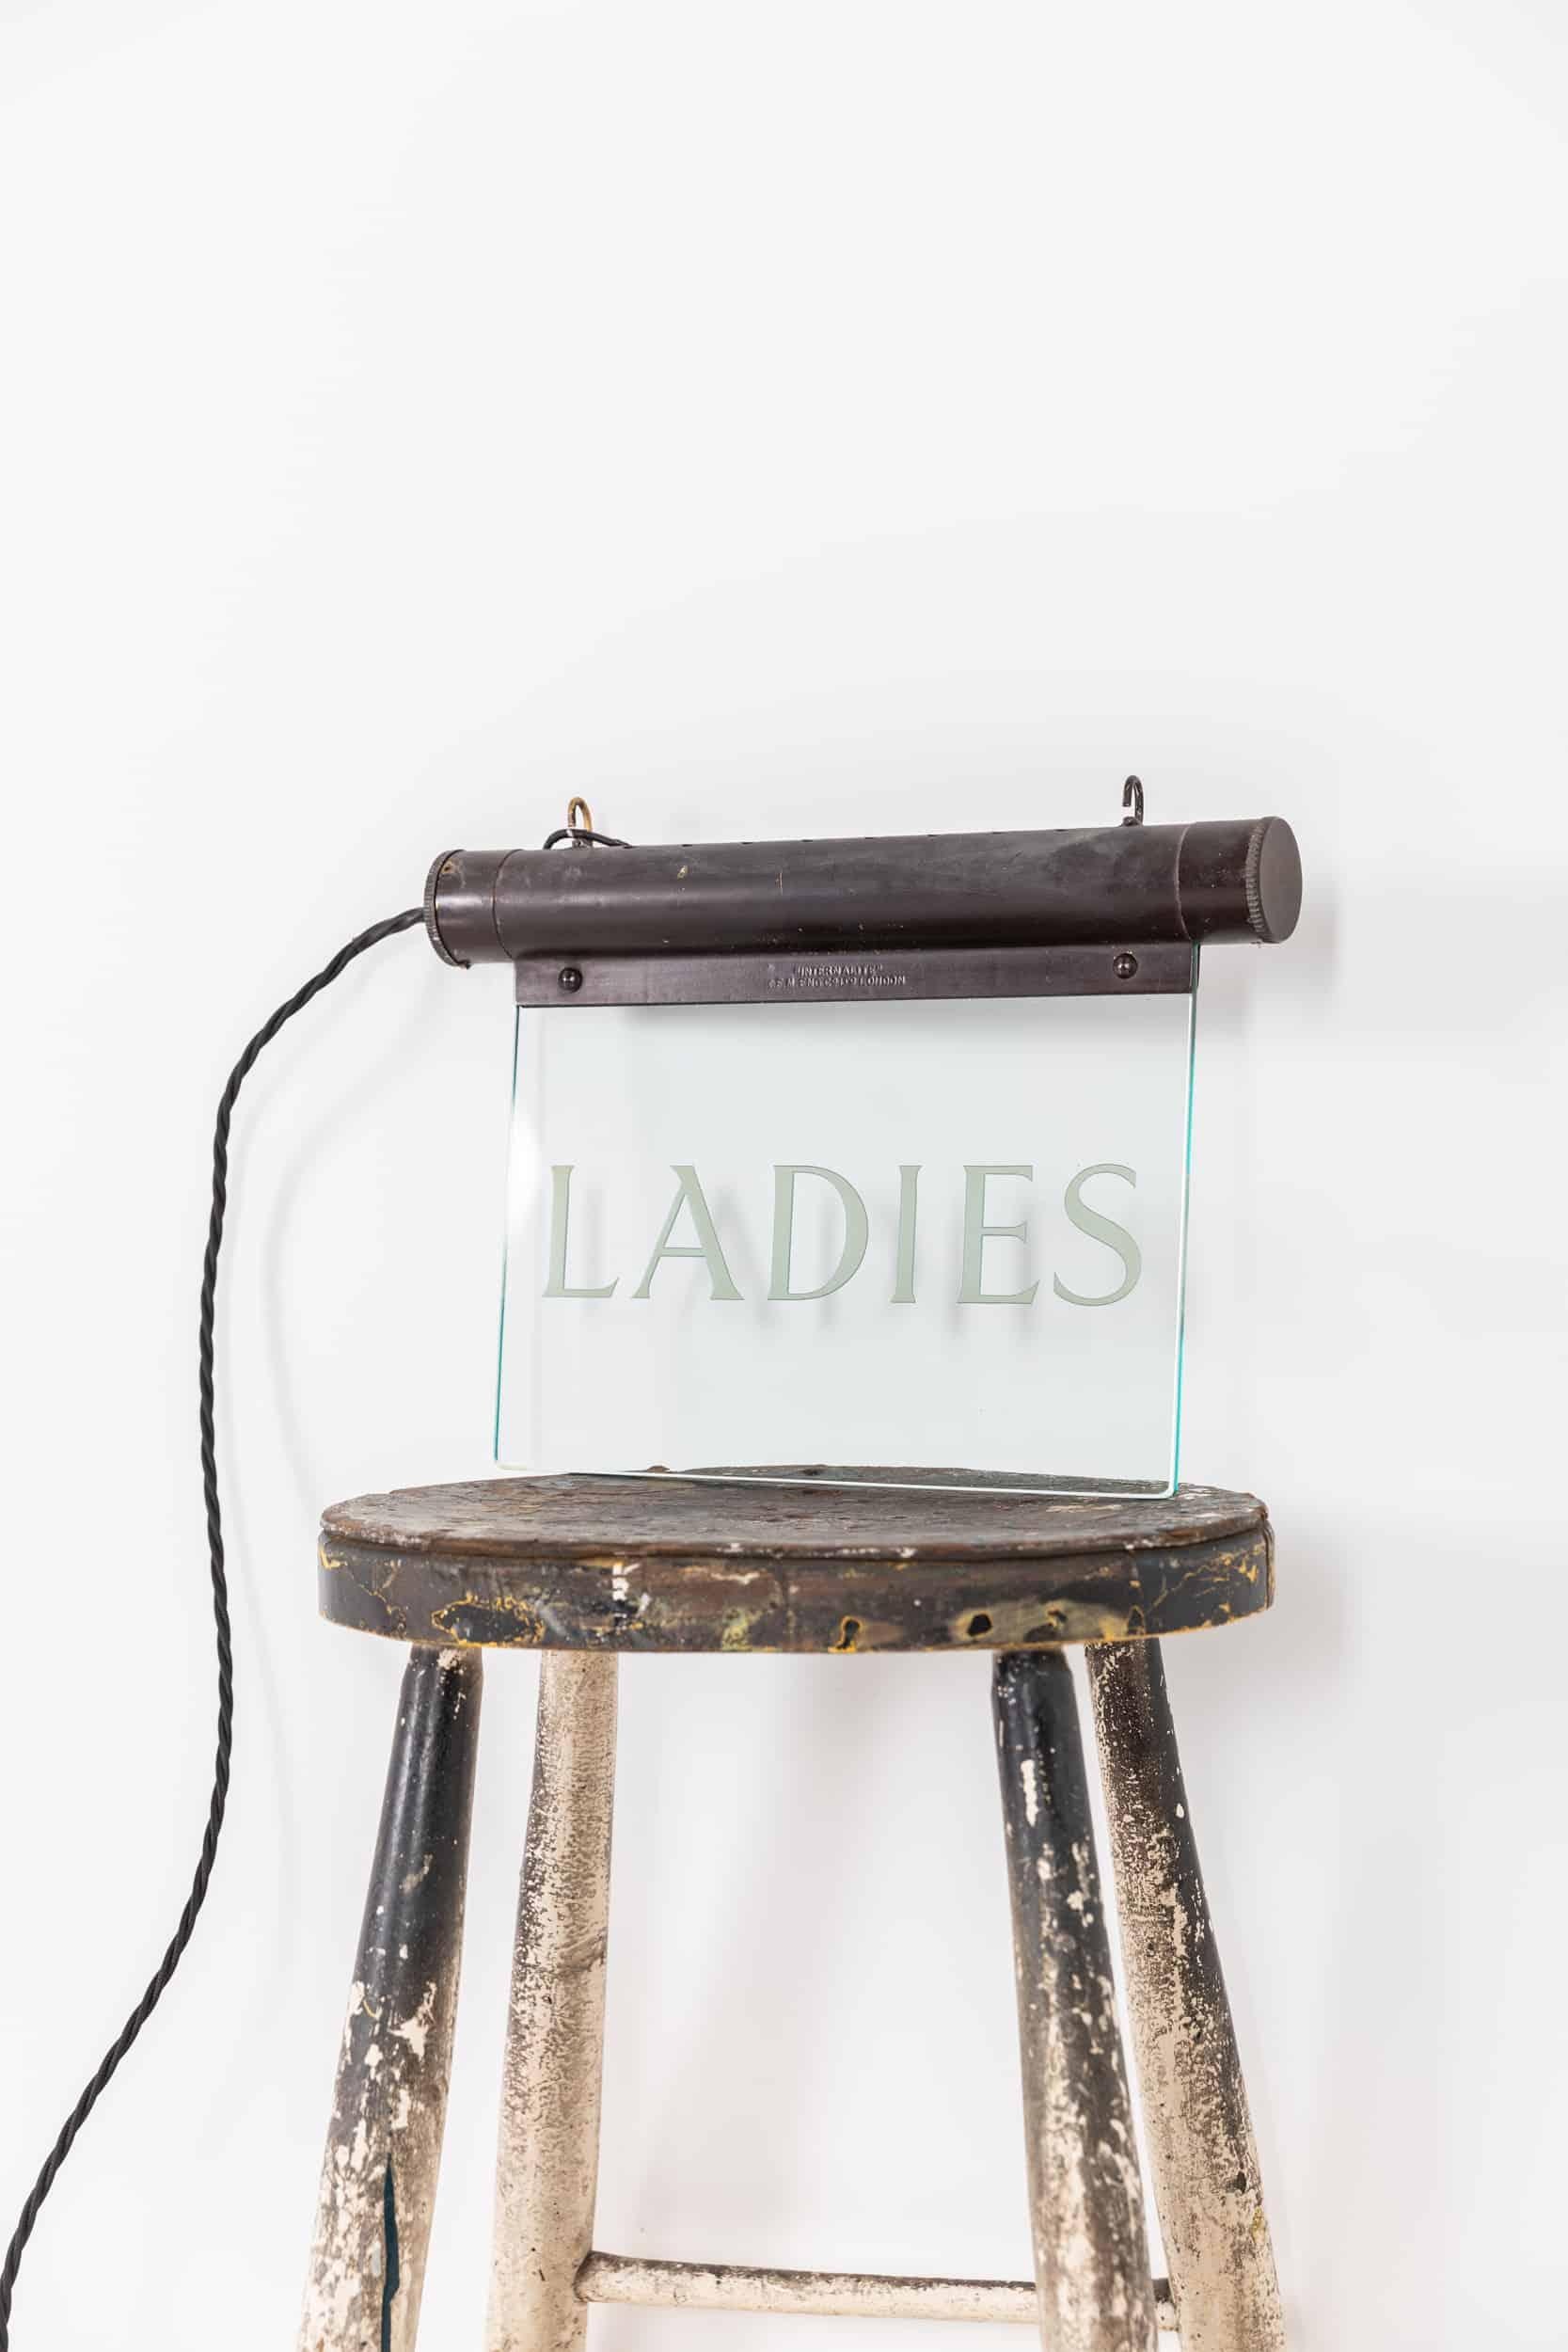 A stunning illuminated 'Internalite' directional sign made in England by K.F.M Engineering. c.1920.

Brass frame, darkened by age, housing the internal illuminations above polished plate glass etched with 'Ladies'. Frame stamped with makers